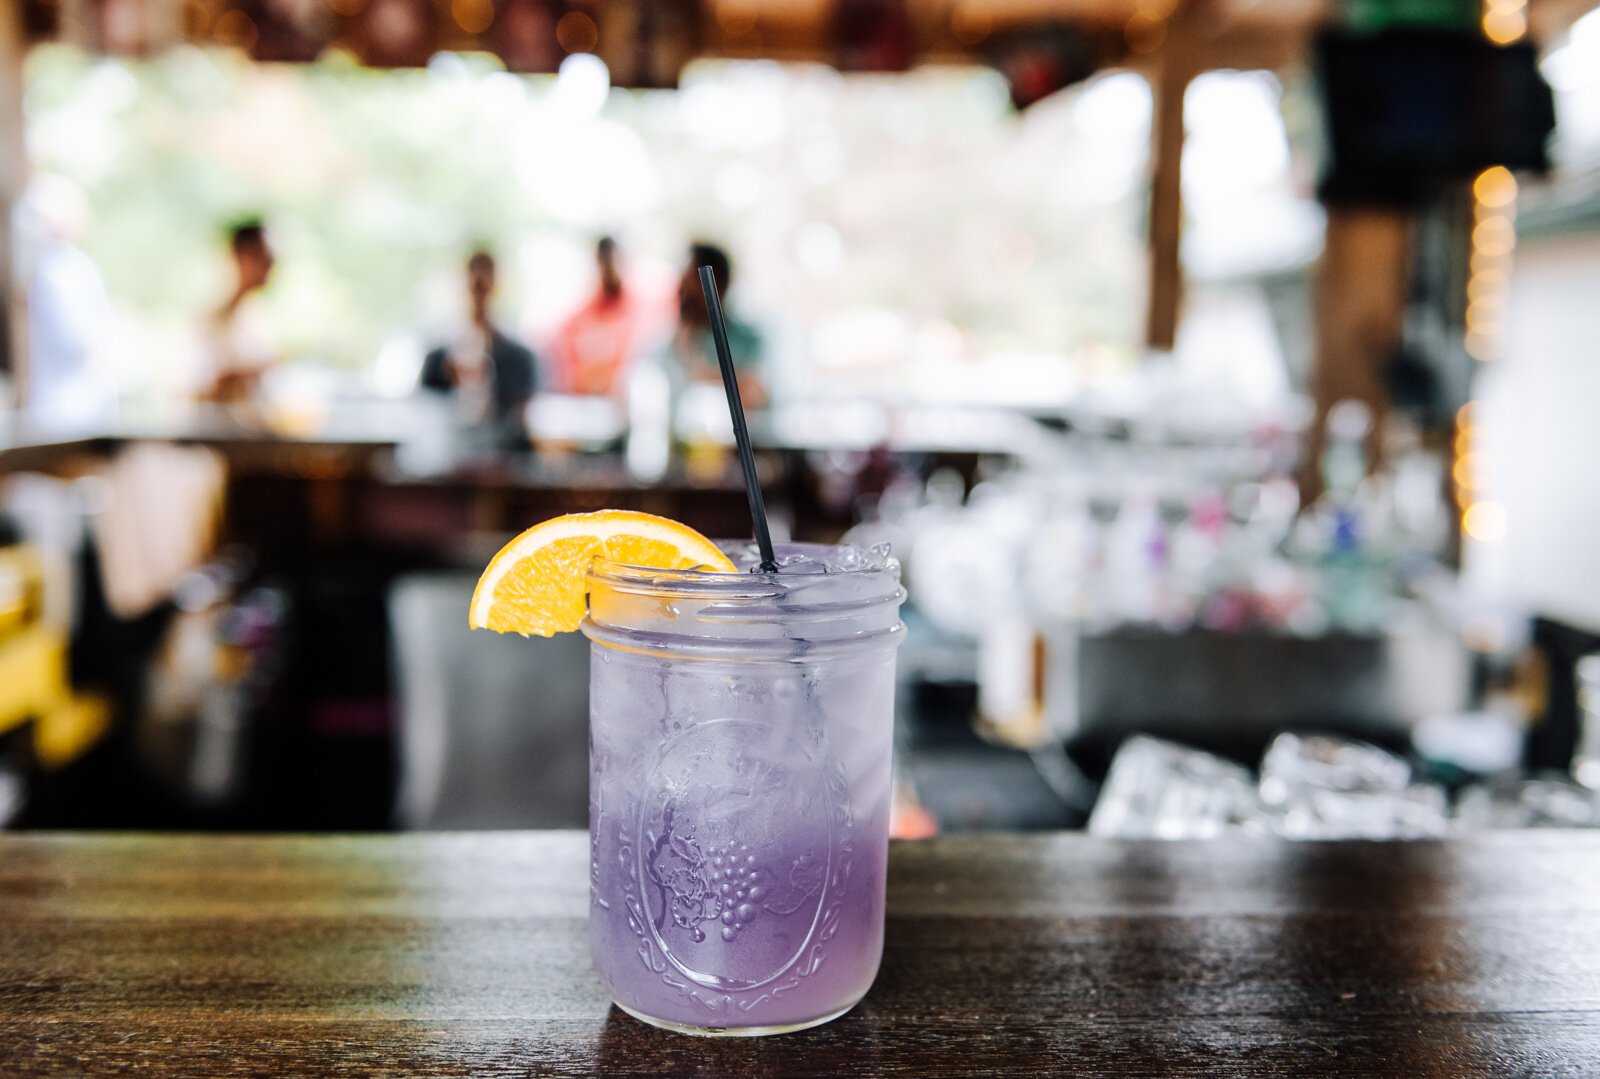 The Purple Haze drink at The Deck, 305 E. Superior.